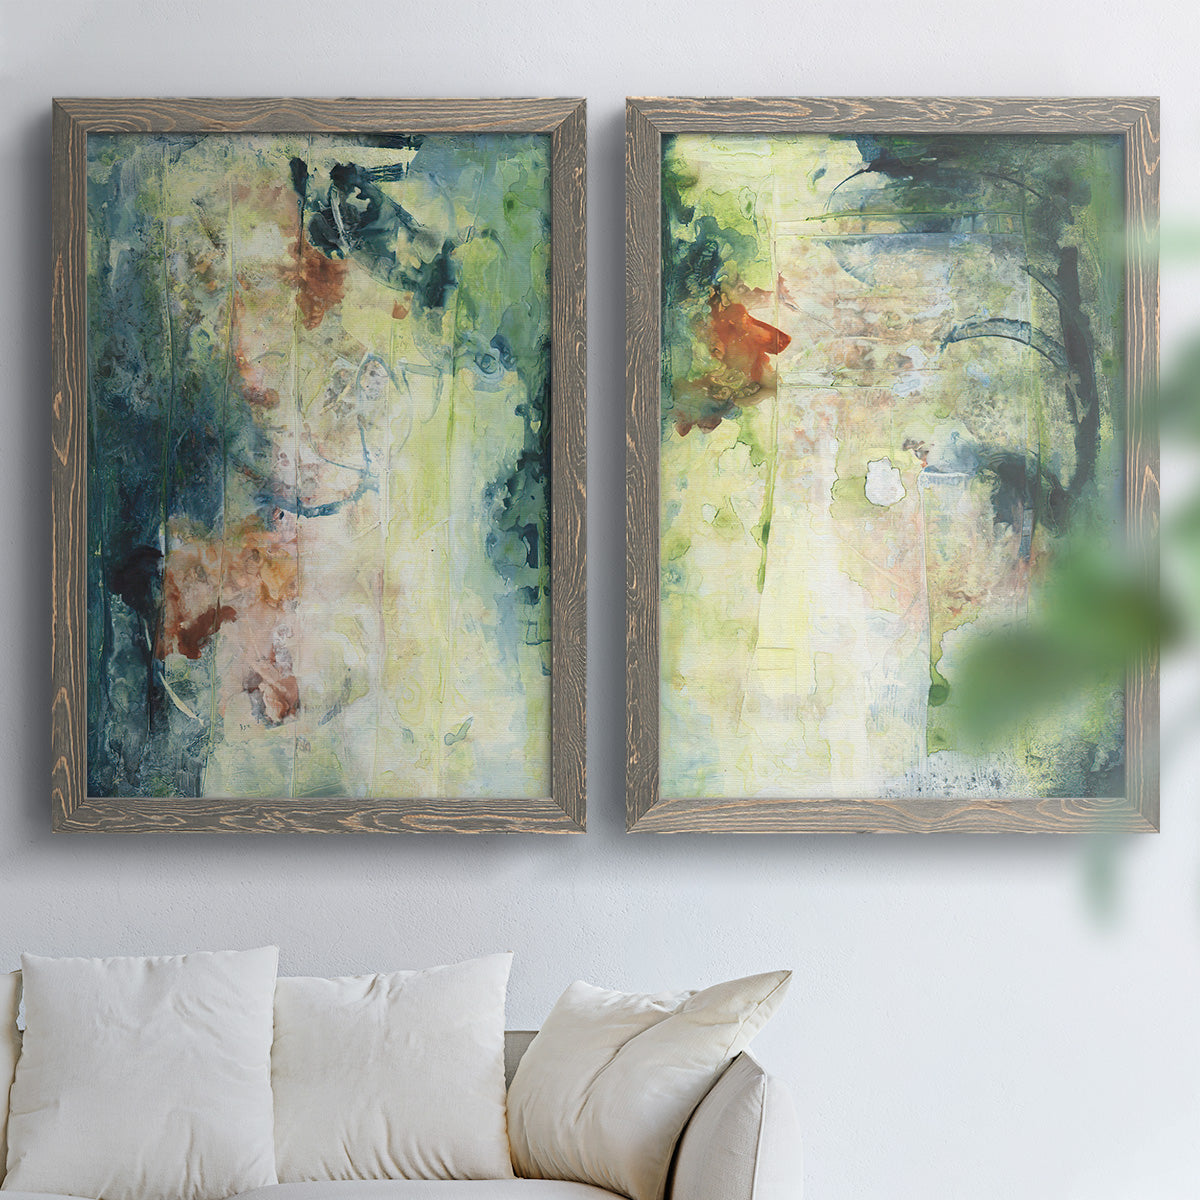 Nature's Elements I - Premium Framed Canvas 2 Piece Set - Ready to Hang